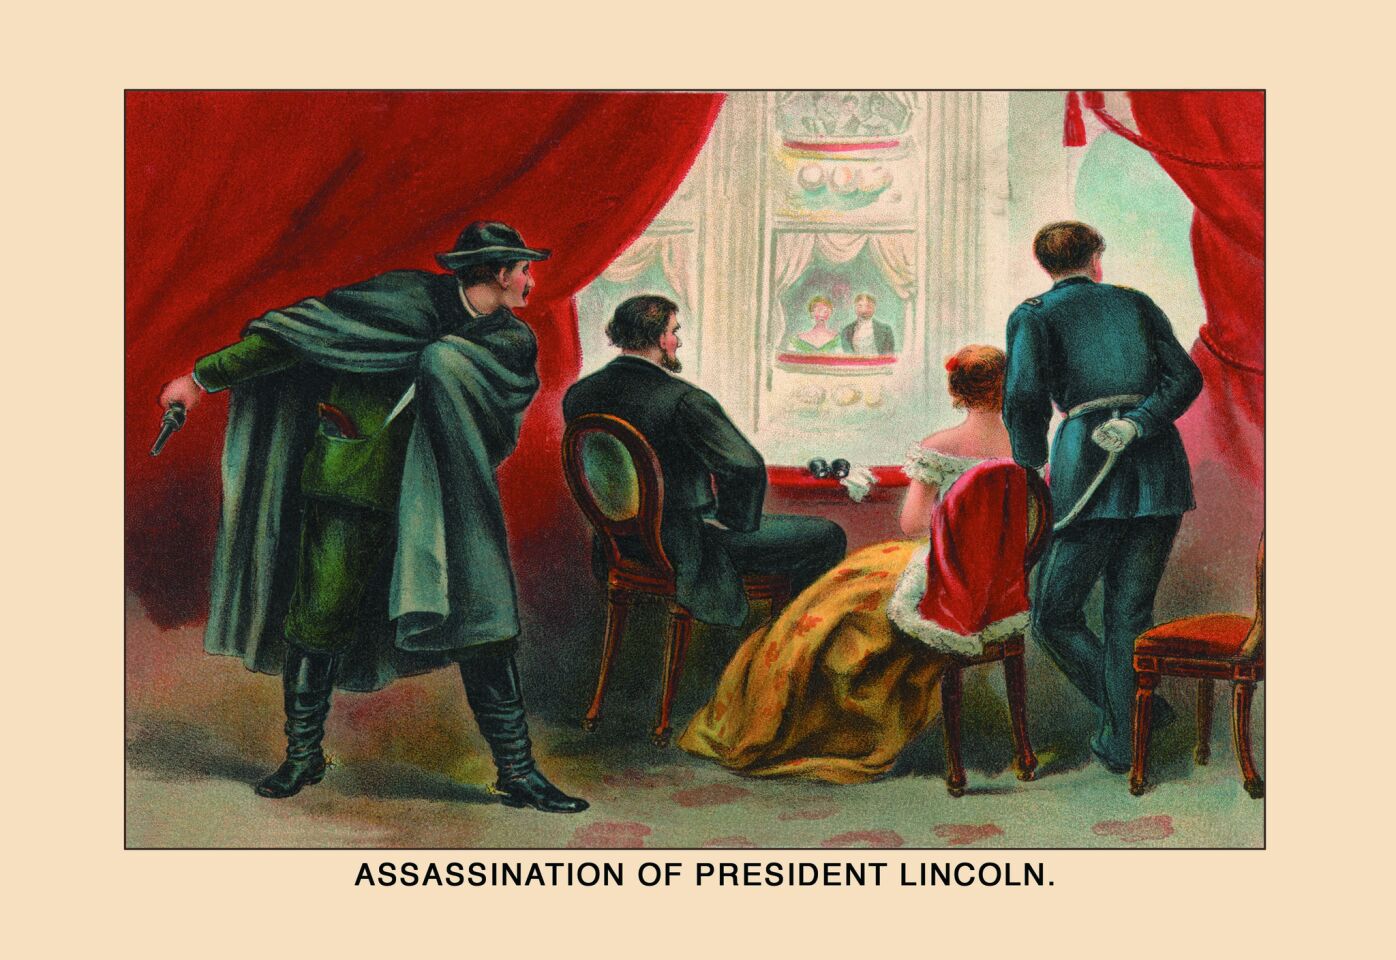 A circa 1900 postcard depicting the 1865 assassination of President Lincoln.